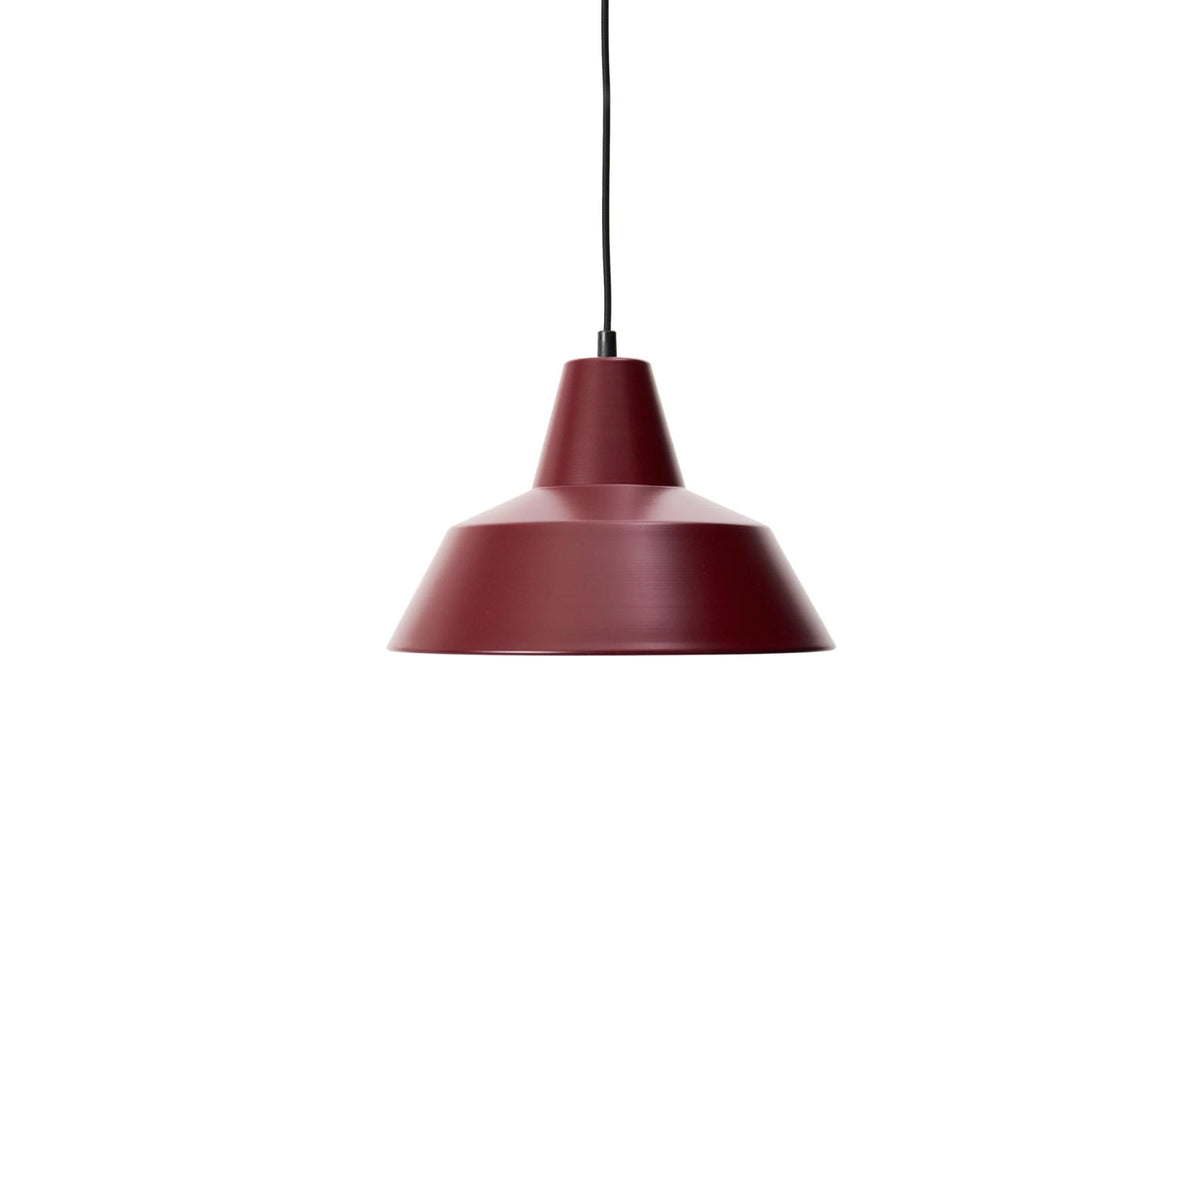 Made by Hand Workshop W3 Pendant by A Wedel Madsen